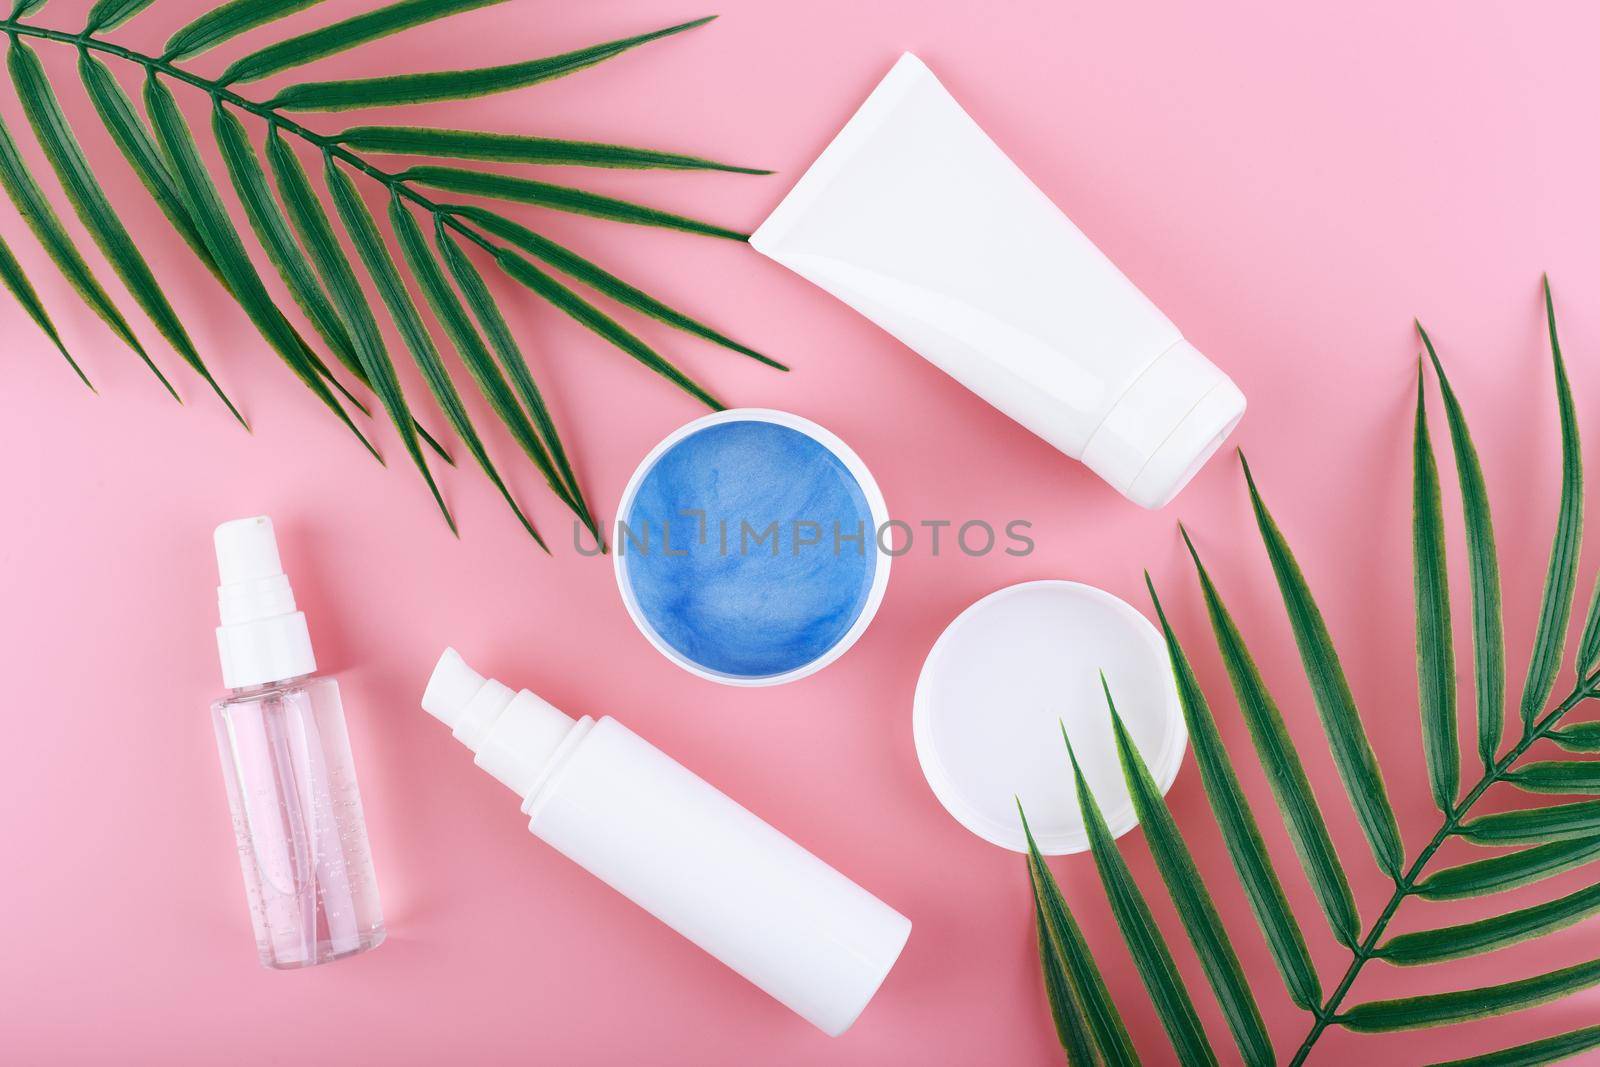 Creative flat lay with cosmetic products for cleaning, moisturizing and exfoliating skin on pink background with palm leaves. Concept of organic natural beauty products for daily skin care